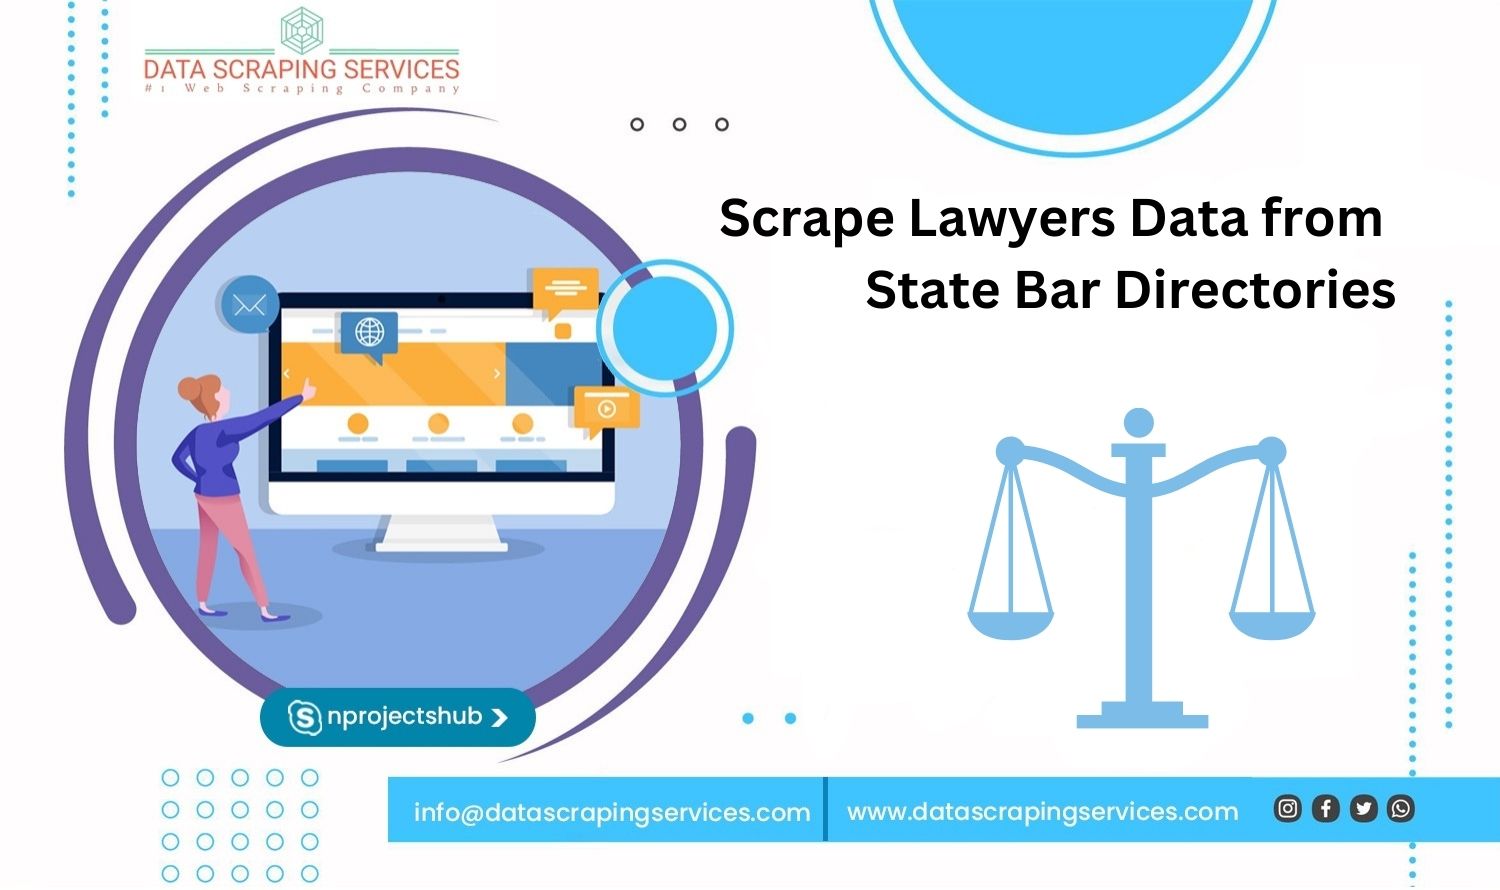 Scrape Lawyers Data from State Bar Directories